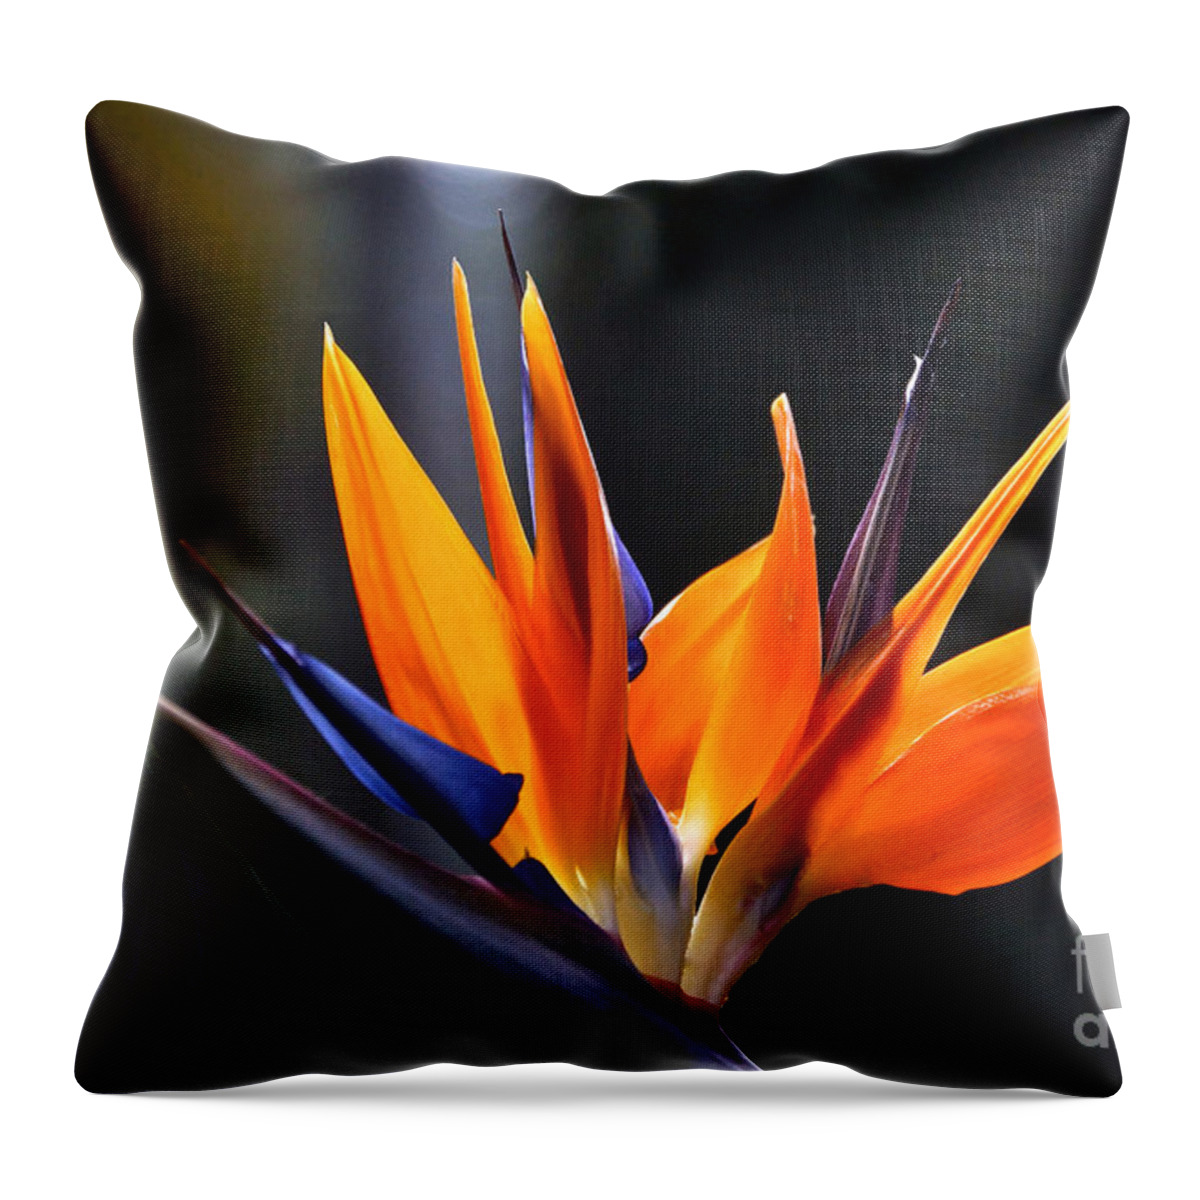 Bird-of-paradise Flower Throw Pillow featuring the photograph Power Flower by Byron Varvarigos